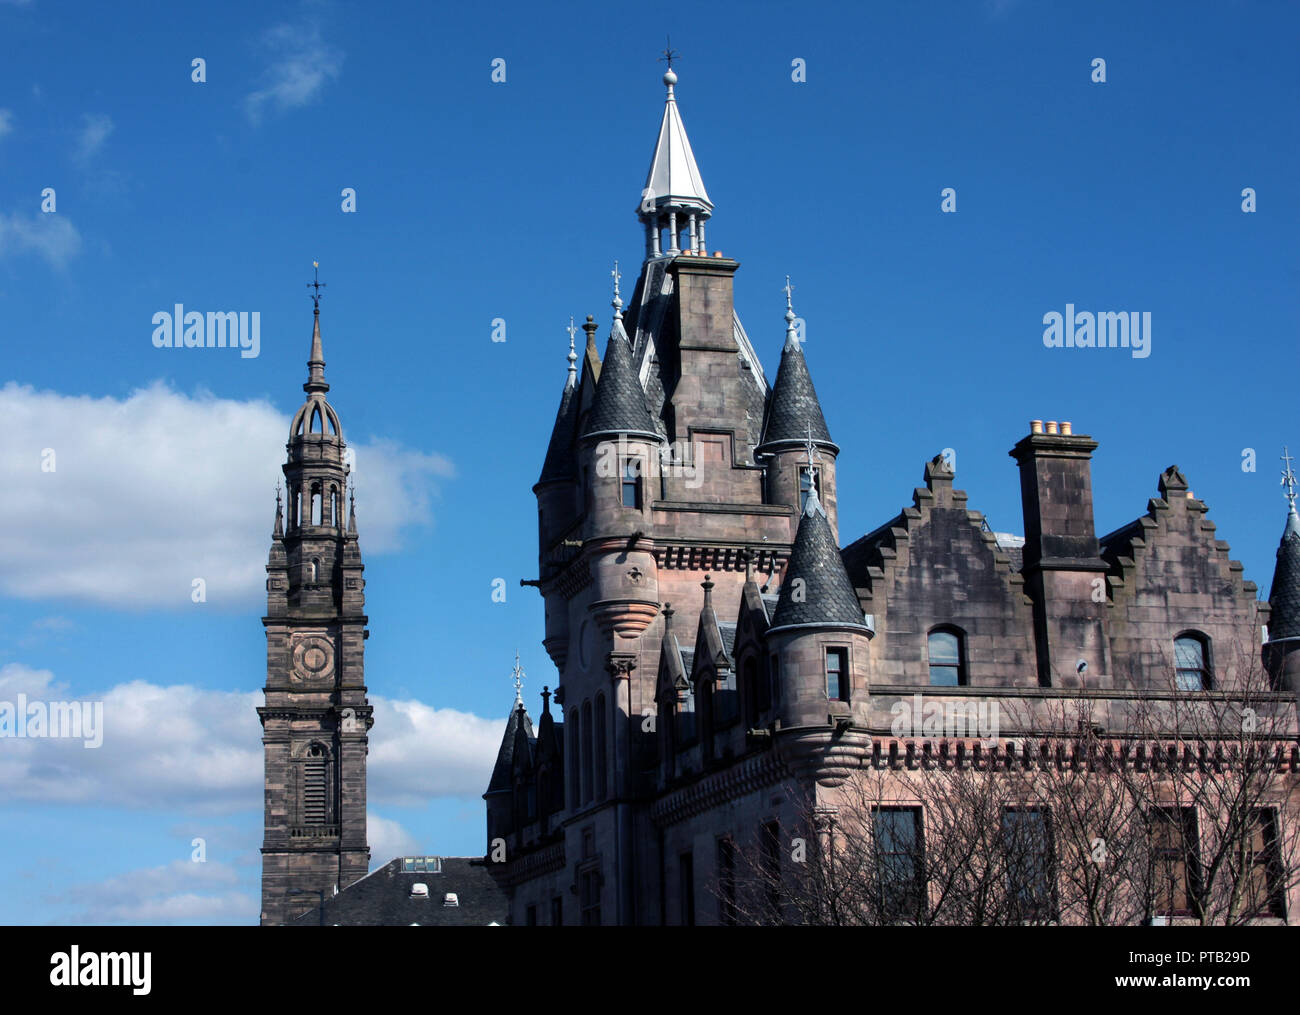 The grand baronial building that is the Sheriff Court in the Scottish town of Greenock looks magnificent against a blue sky with the tower of St George's church just behind it. Stock Photo